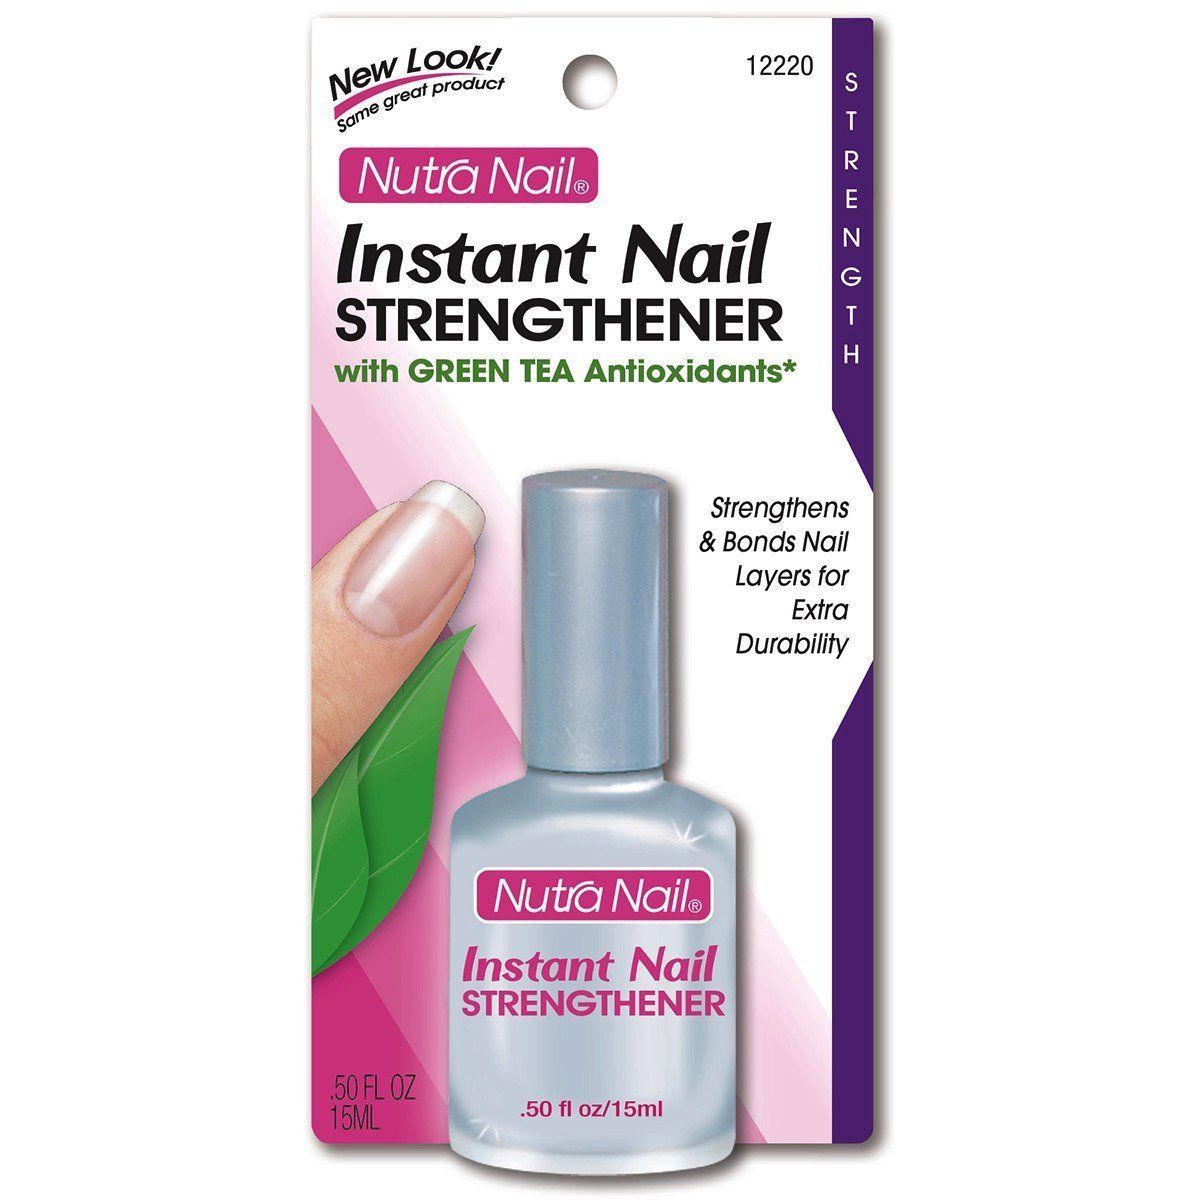 Nutra Nail Speed Dry 30 Second Top Coat with Green Tea Antioxidants